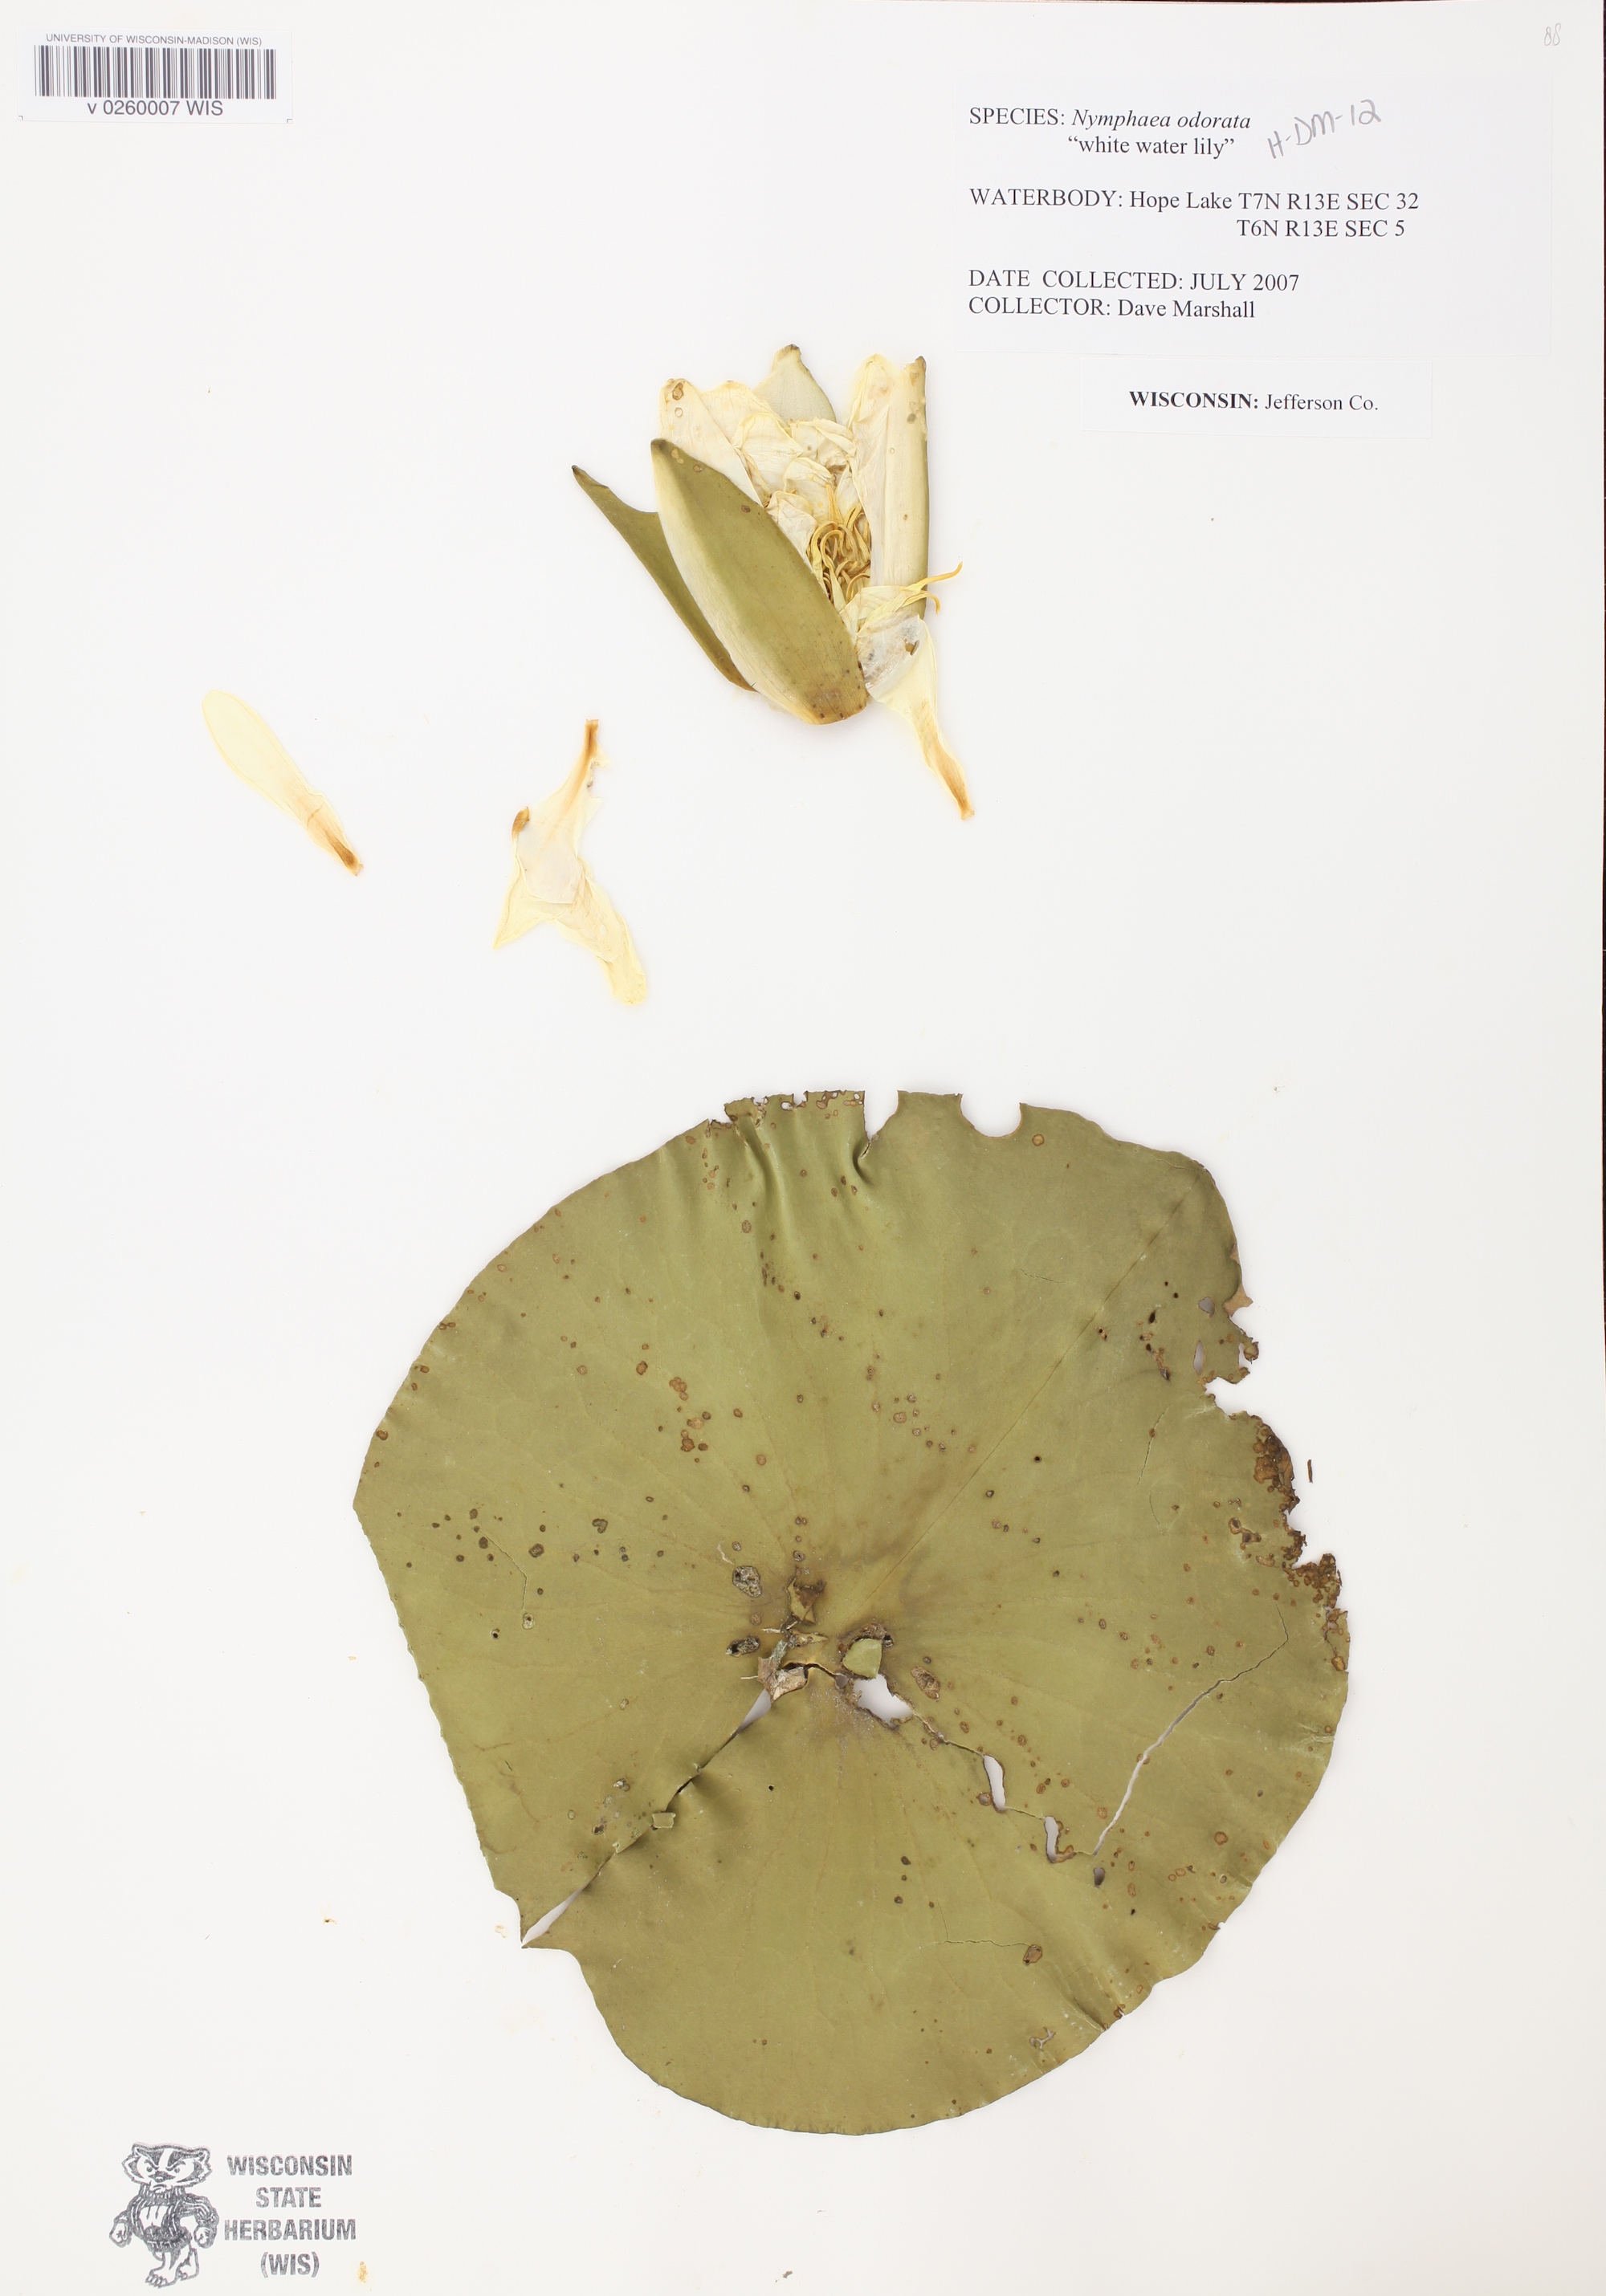 American White Water Lily specimen collected near Plateville, Wisconsin on September 18, 1962.